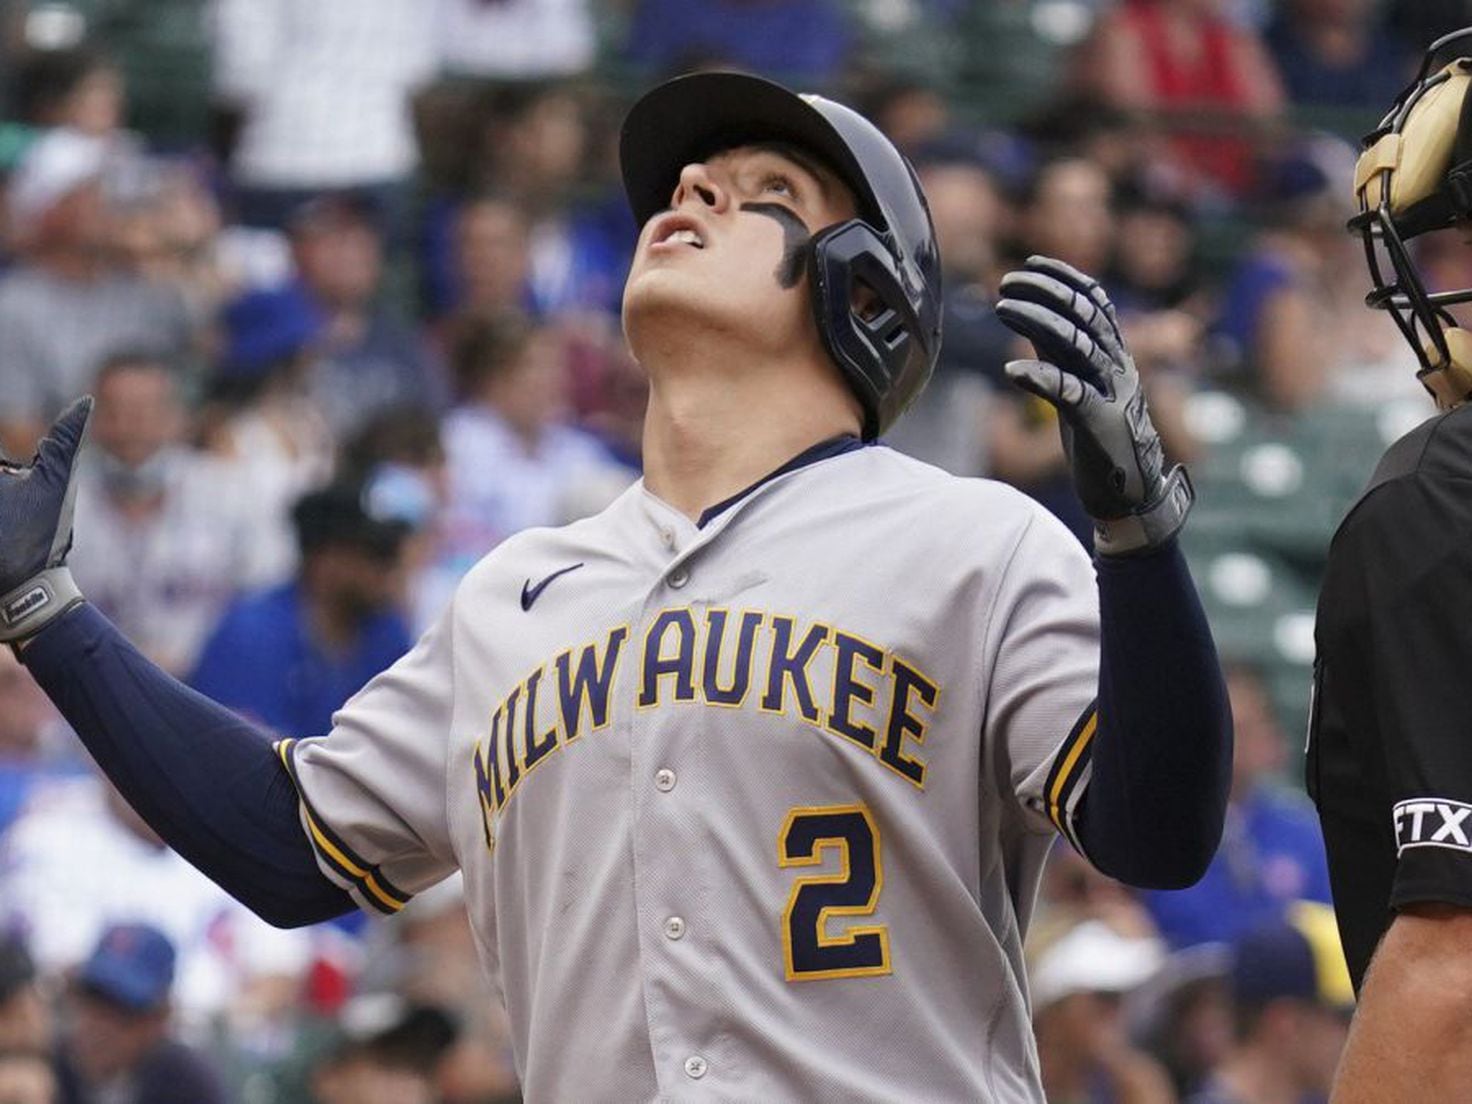 Milwaukee Brewers - News, Schedule, Scores, Roster, and Stats